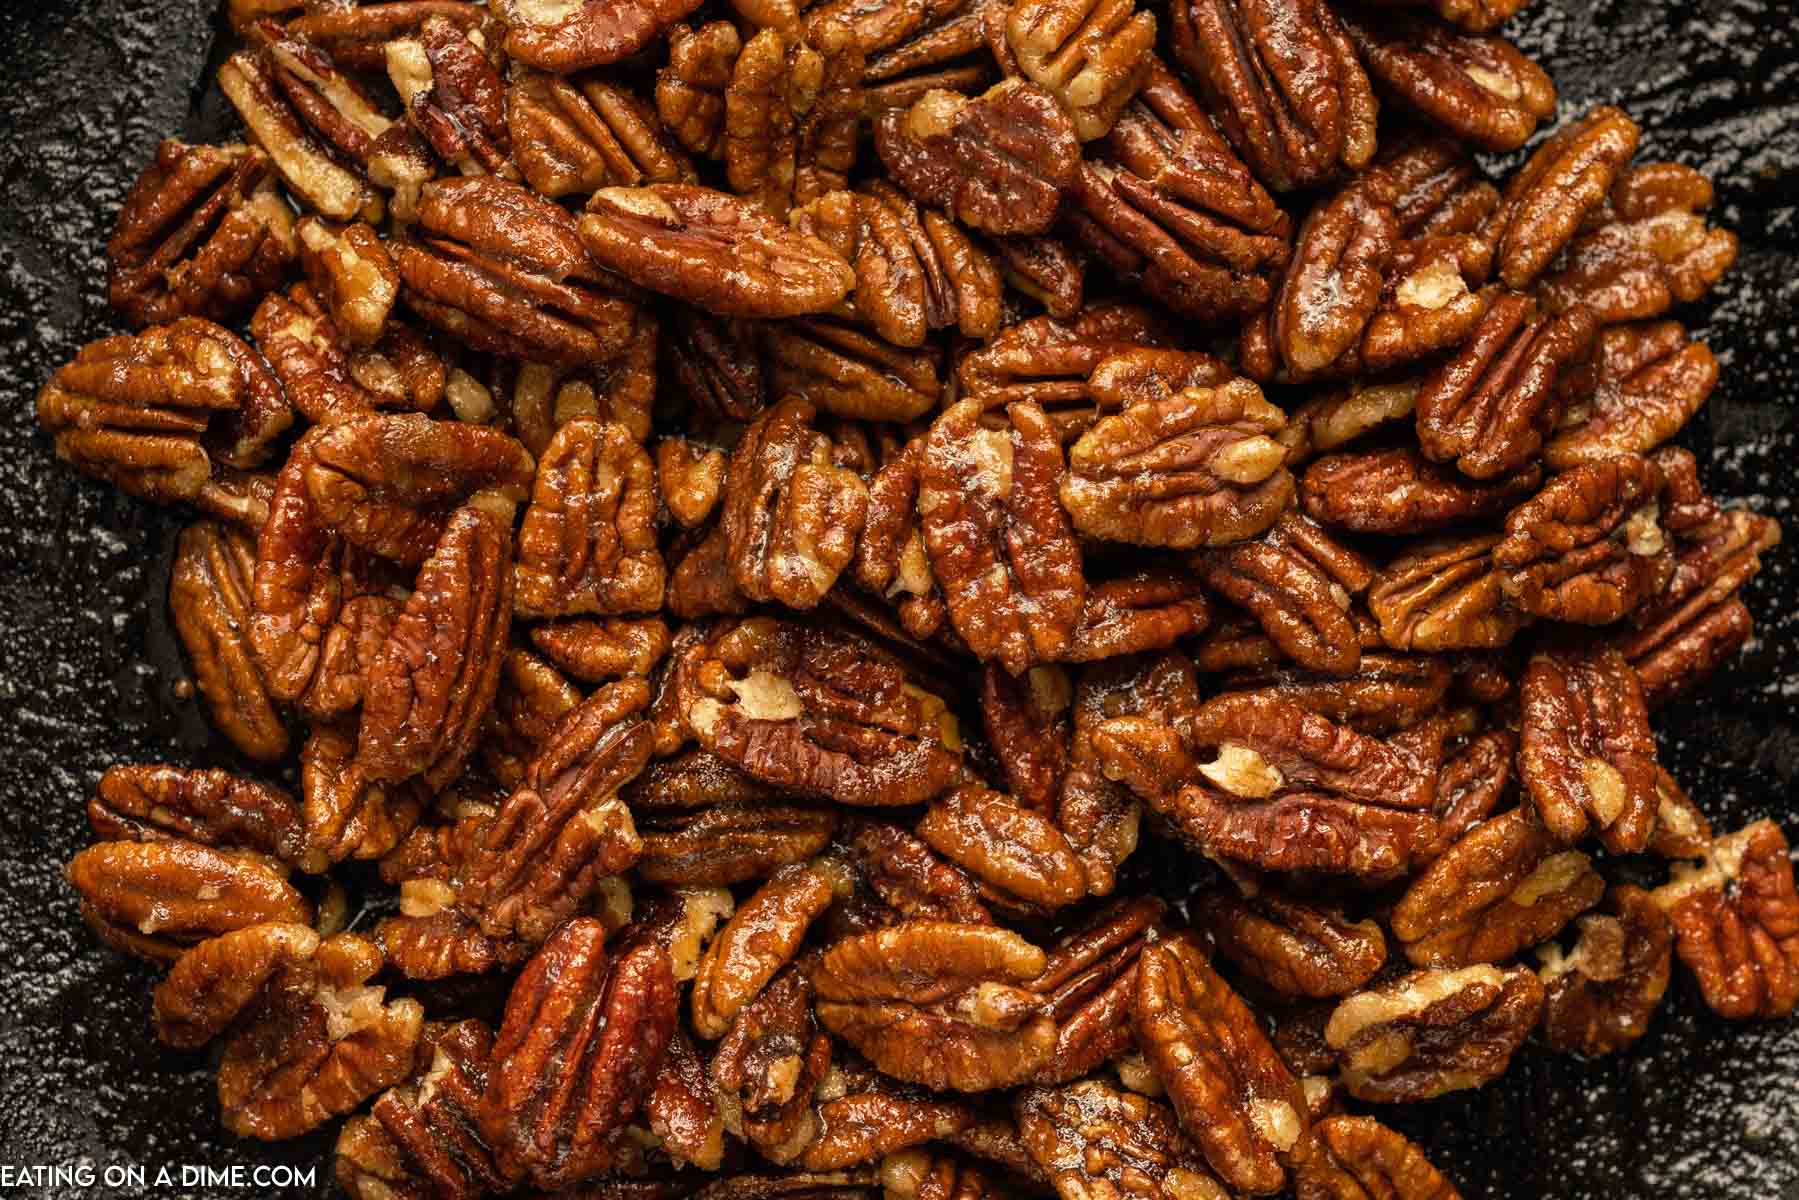 Candied pecans in a dish